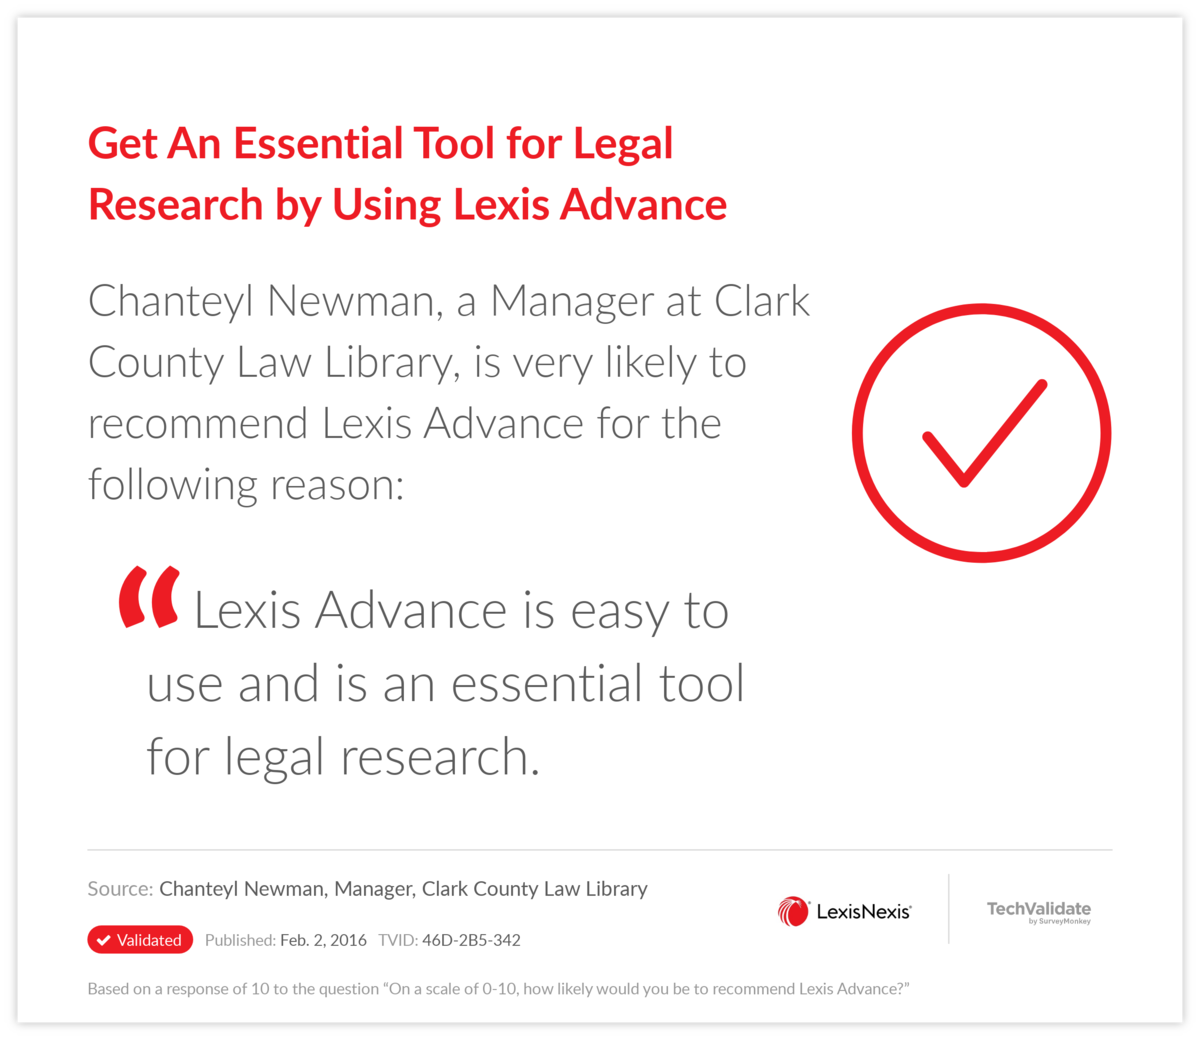 Get An Essential Tool for Legal Research by Using Lexis Advance